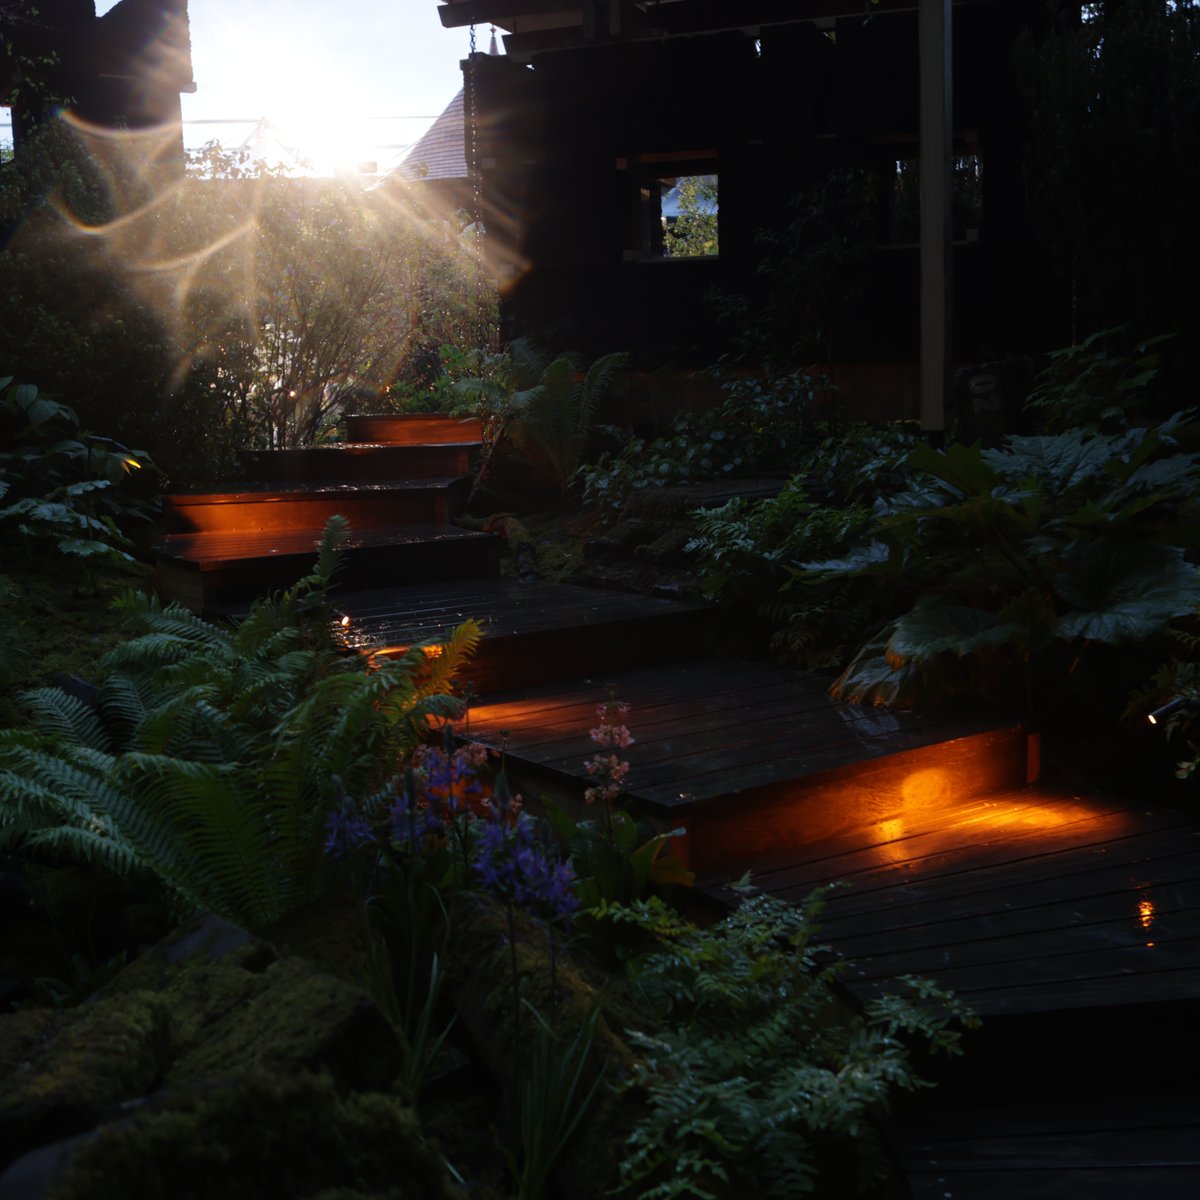 Warm orange tones against beautiful changes of level within the NAS Garden at Chelsea flower show 2024. Dark skies friendly lighting used to navigate the steps in 1800K - fully downward illuminating. #NASGarden #NationalAutisticSociety #SophieParmenterStudio #CSKArchitects